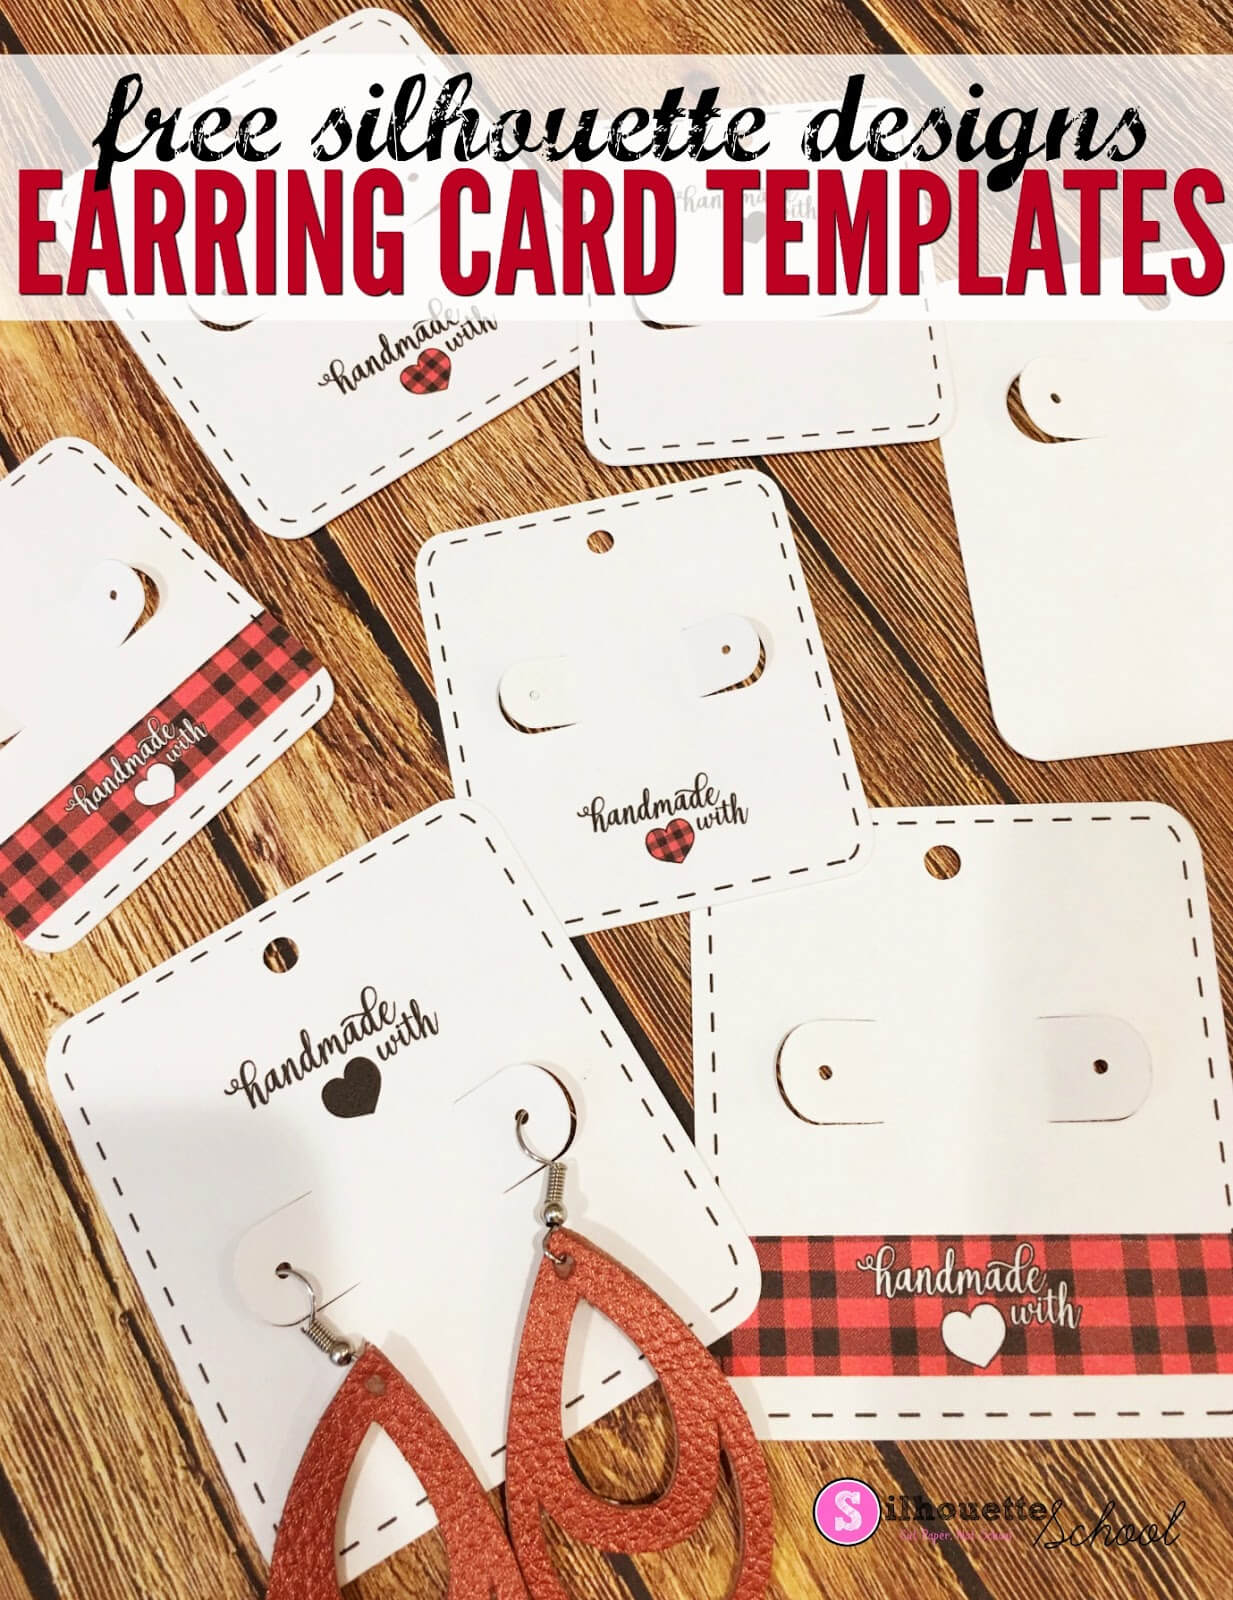 Free Silhouette Earring Card Templates (Set Of 8 Regarding Free Svg Card Templates